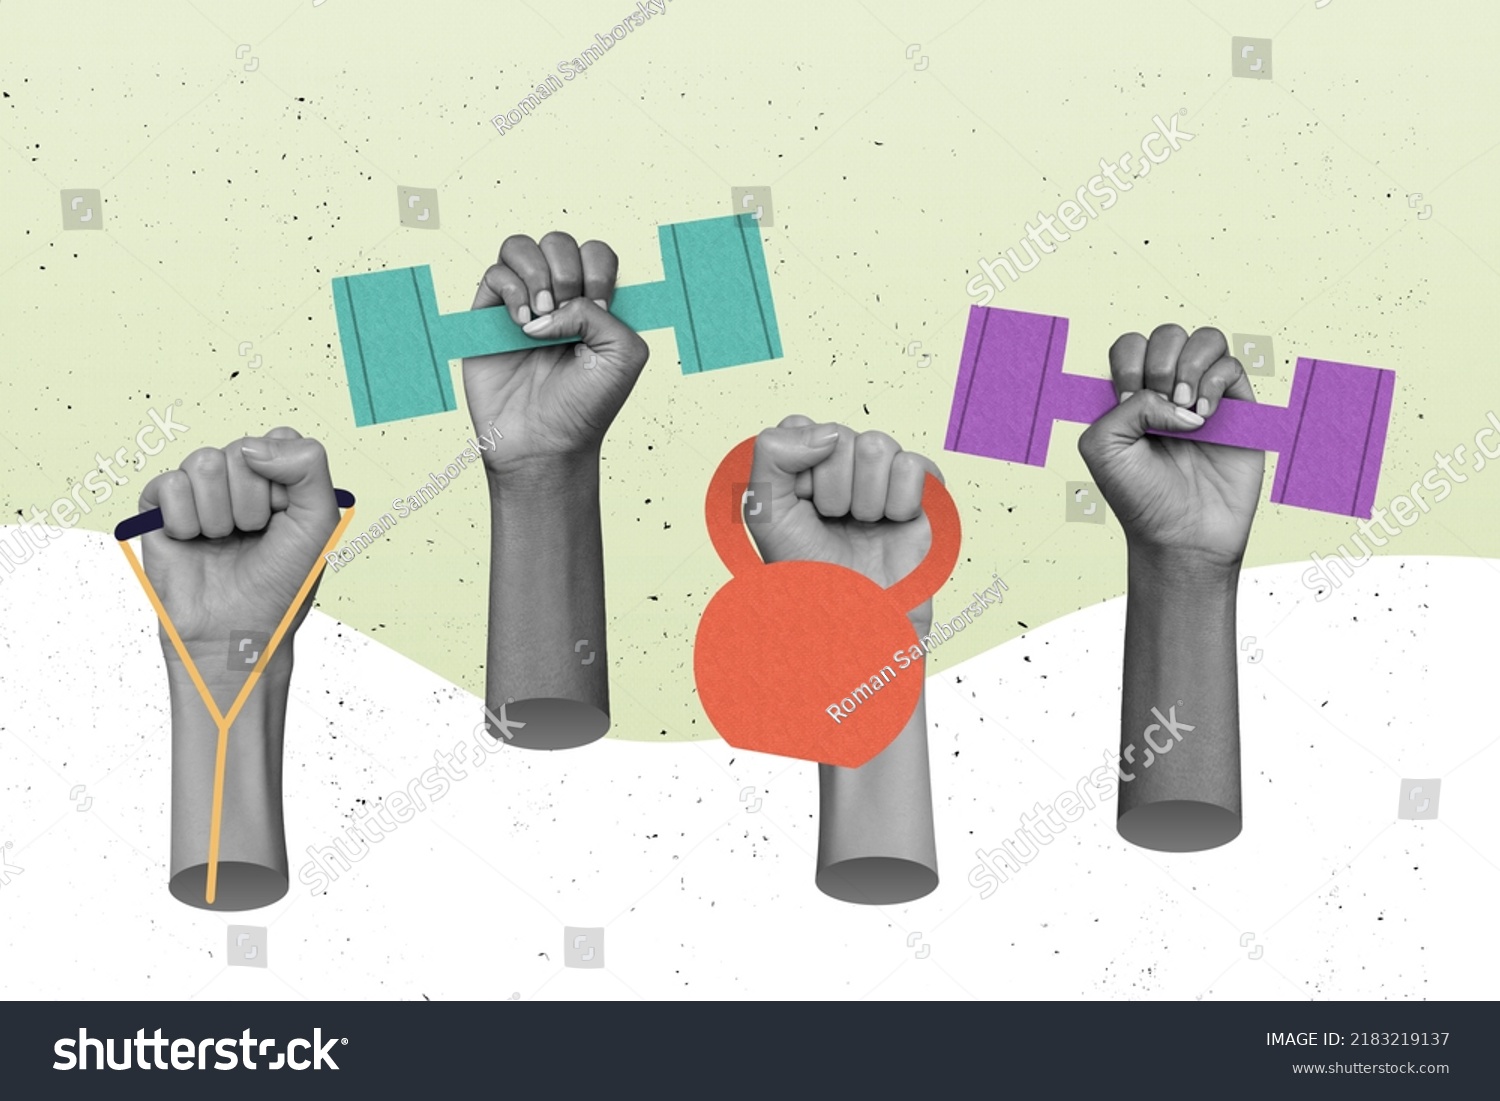 Poster collage of sportsman arms raise fitness tools health life body development concept isolated paint color background #2183219137